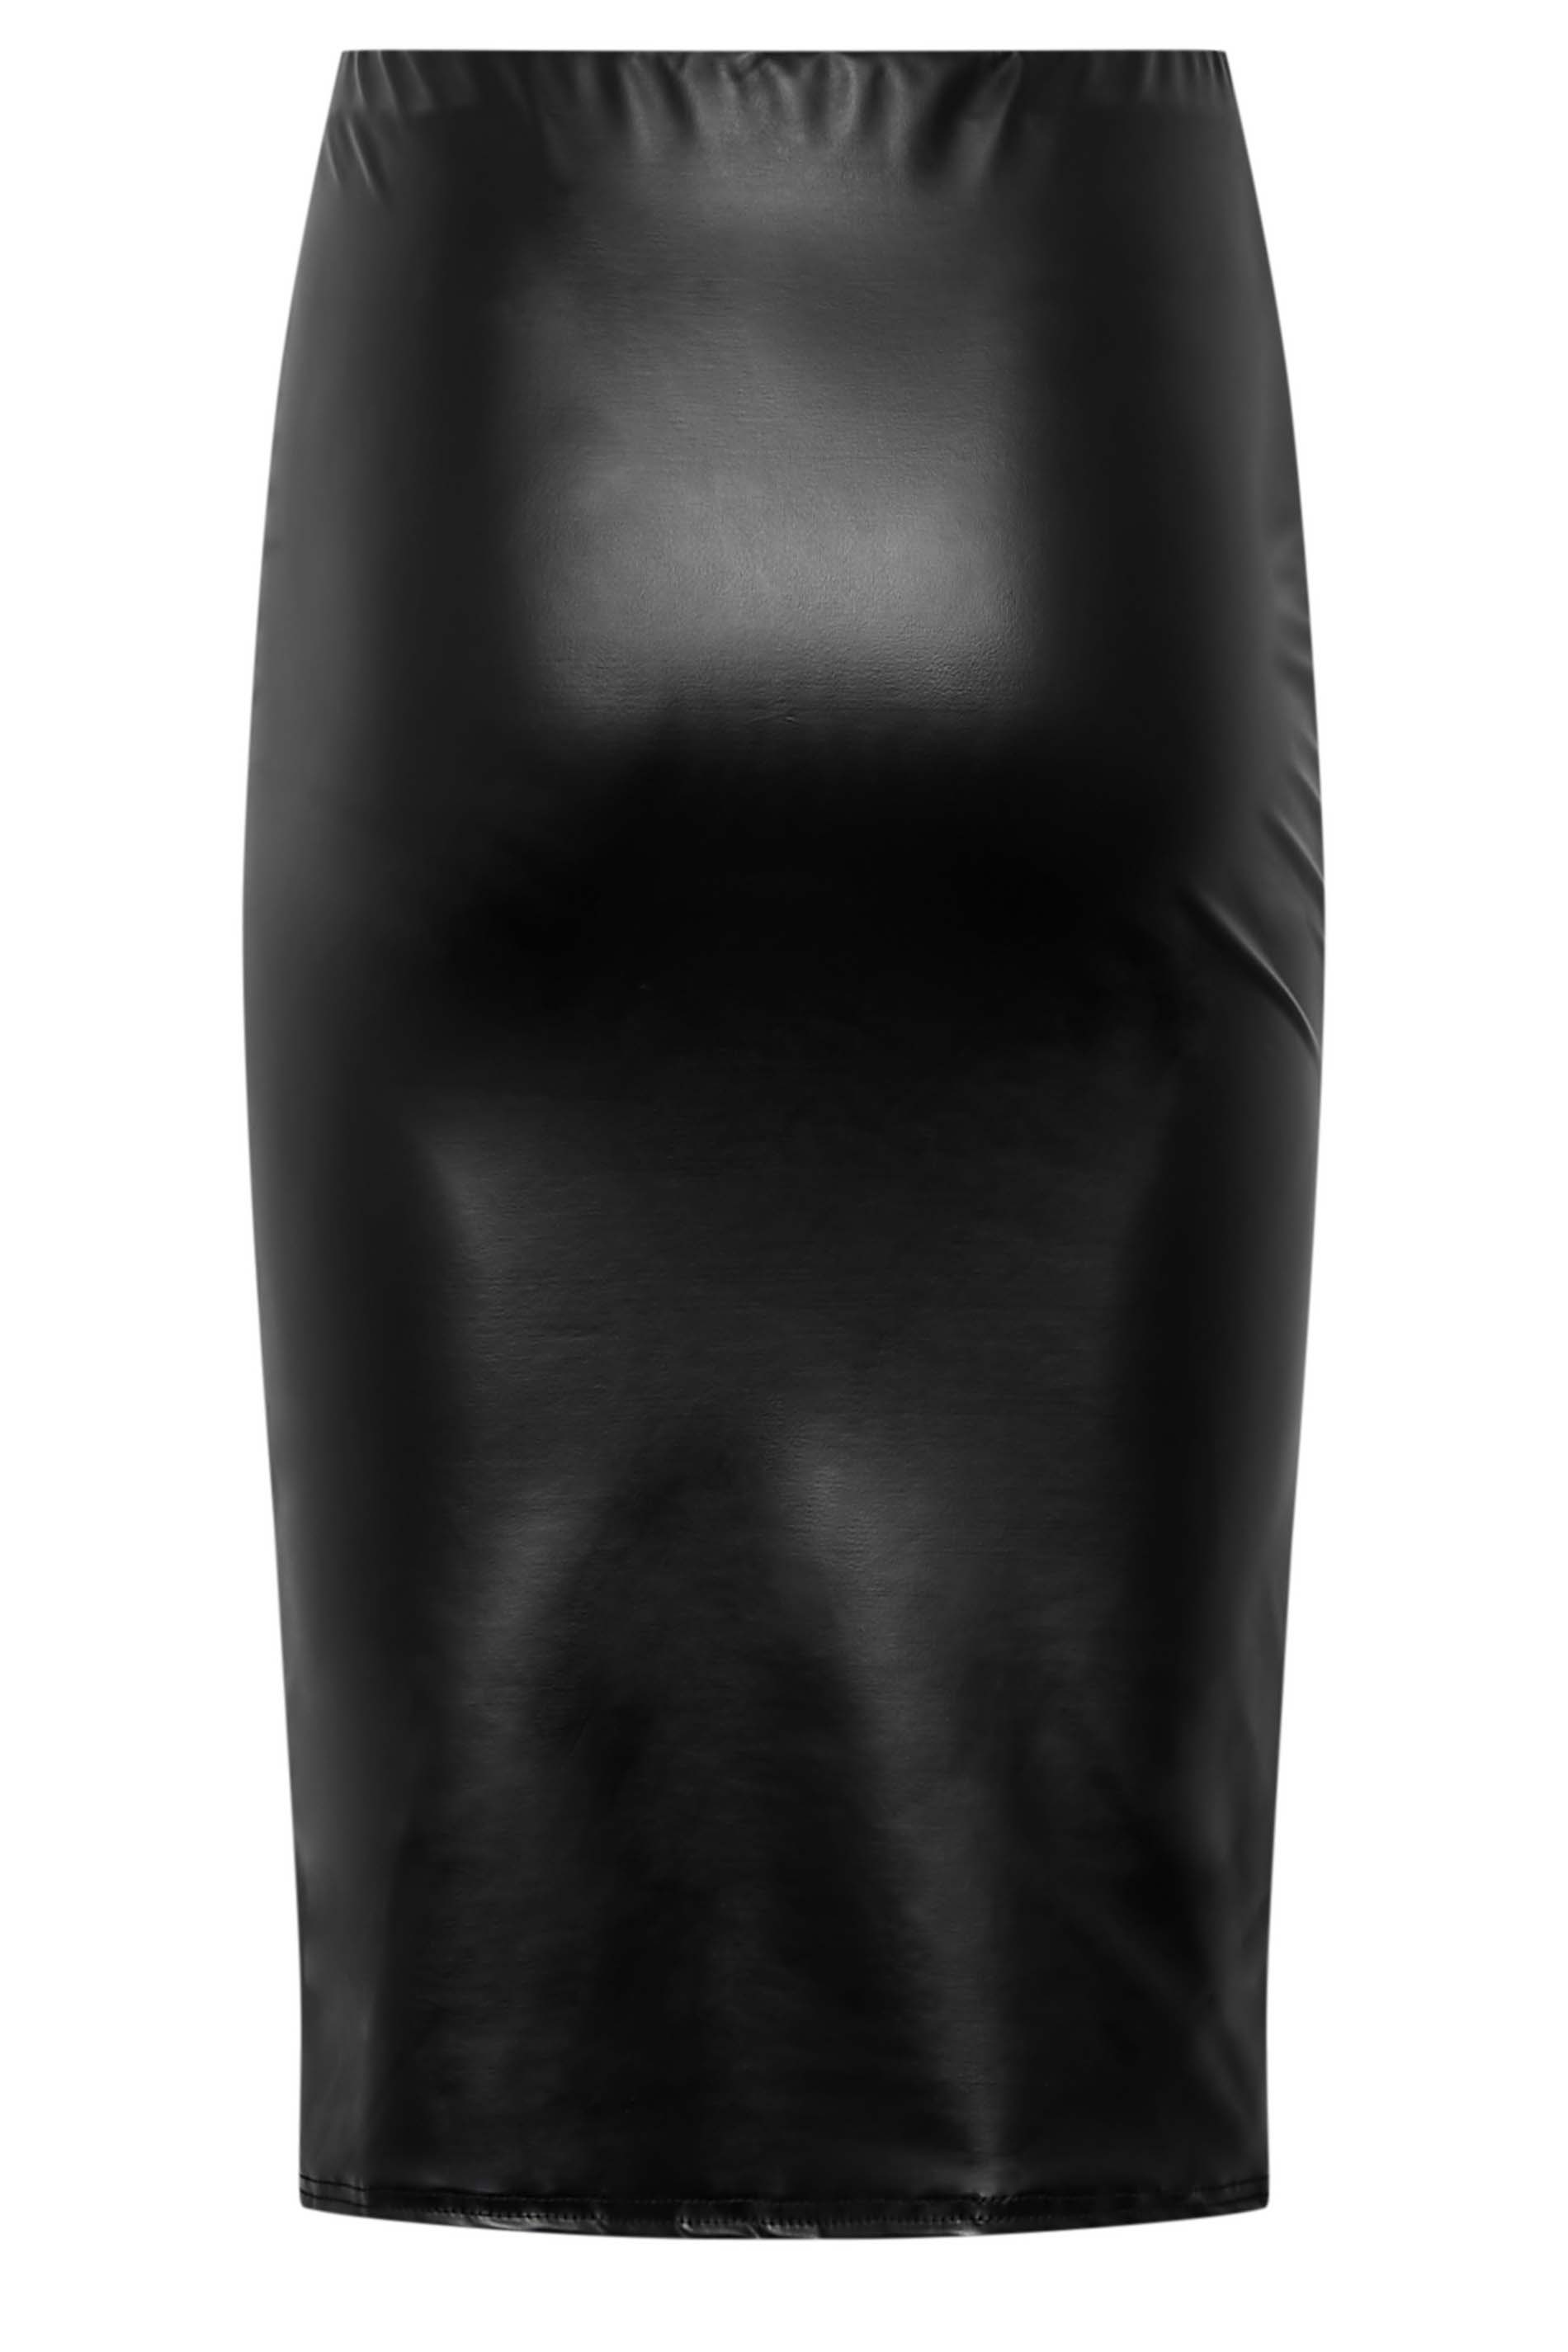 LTS Tall Women's Black Faux Leather Pencil Skirt | Long Tall Sally